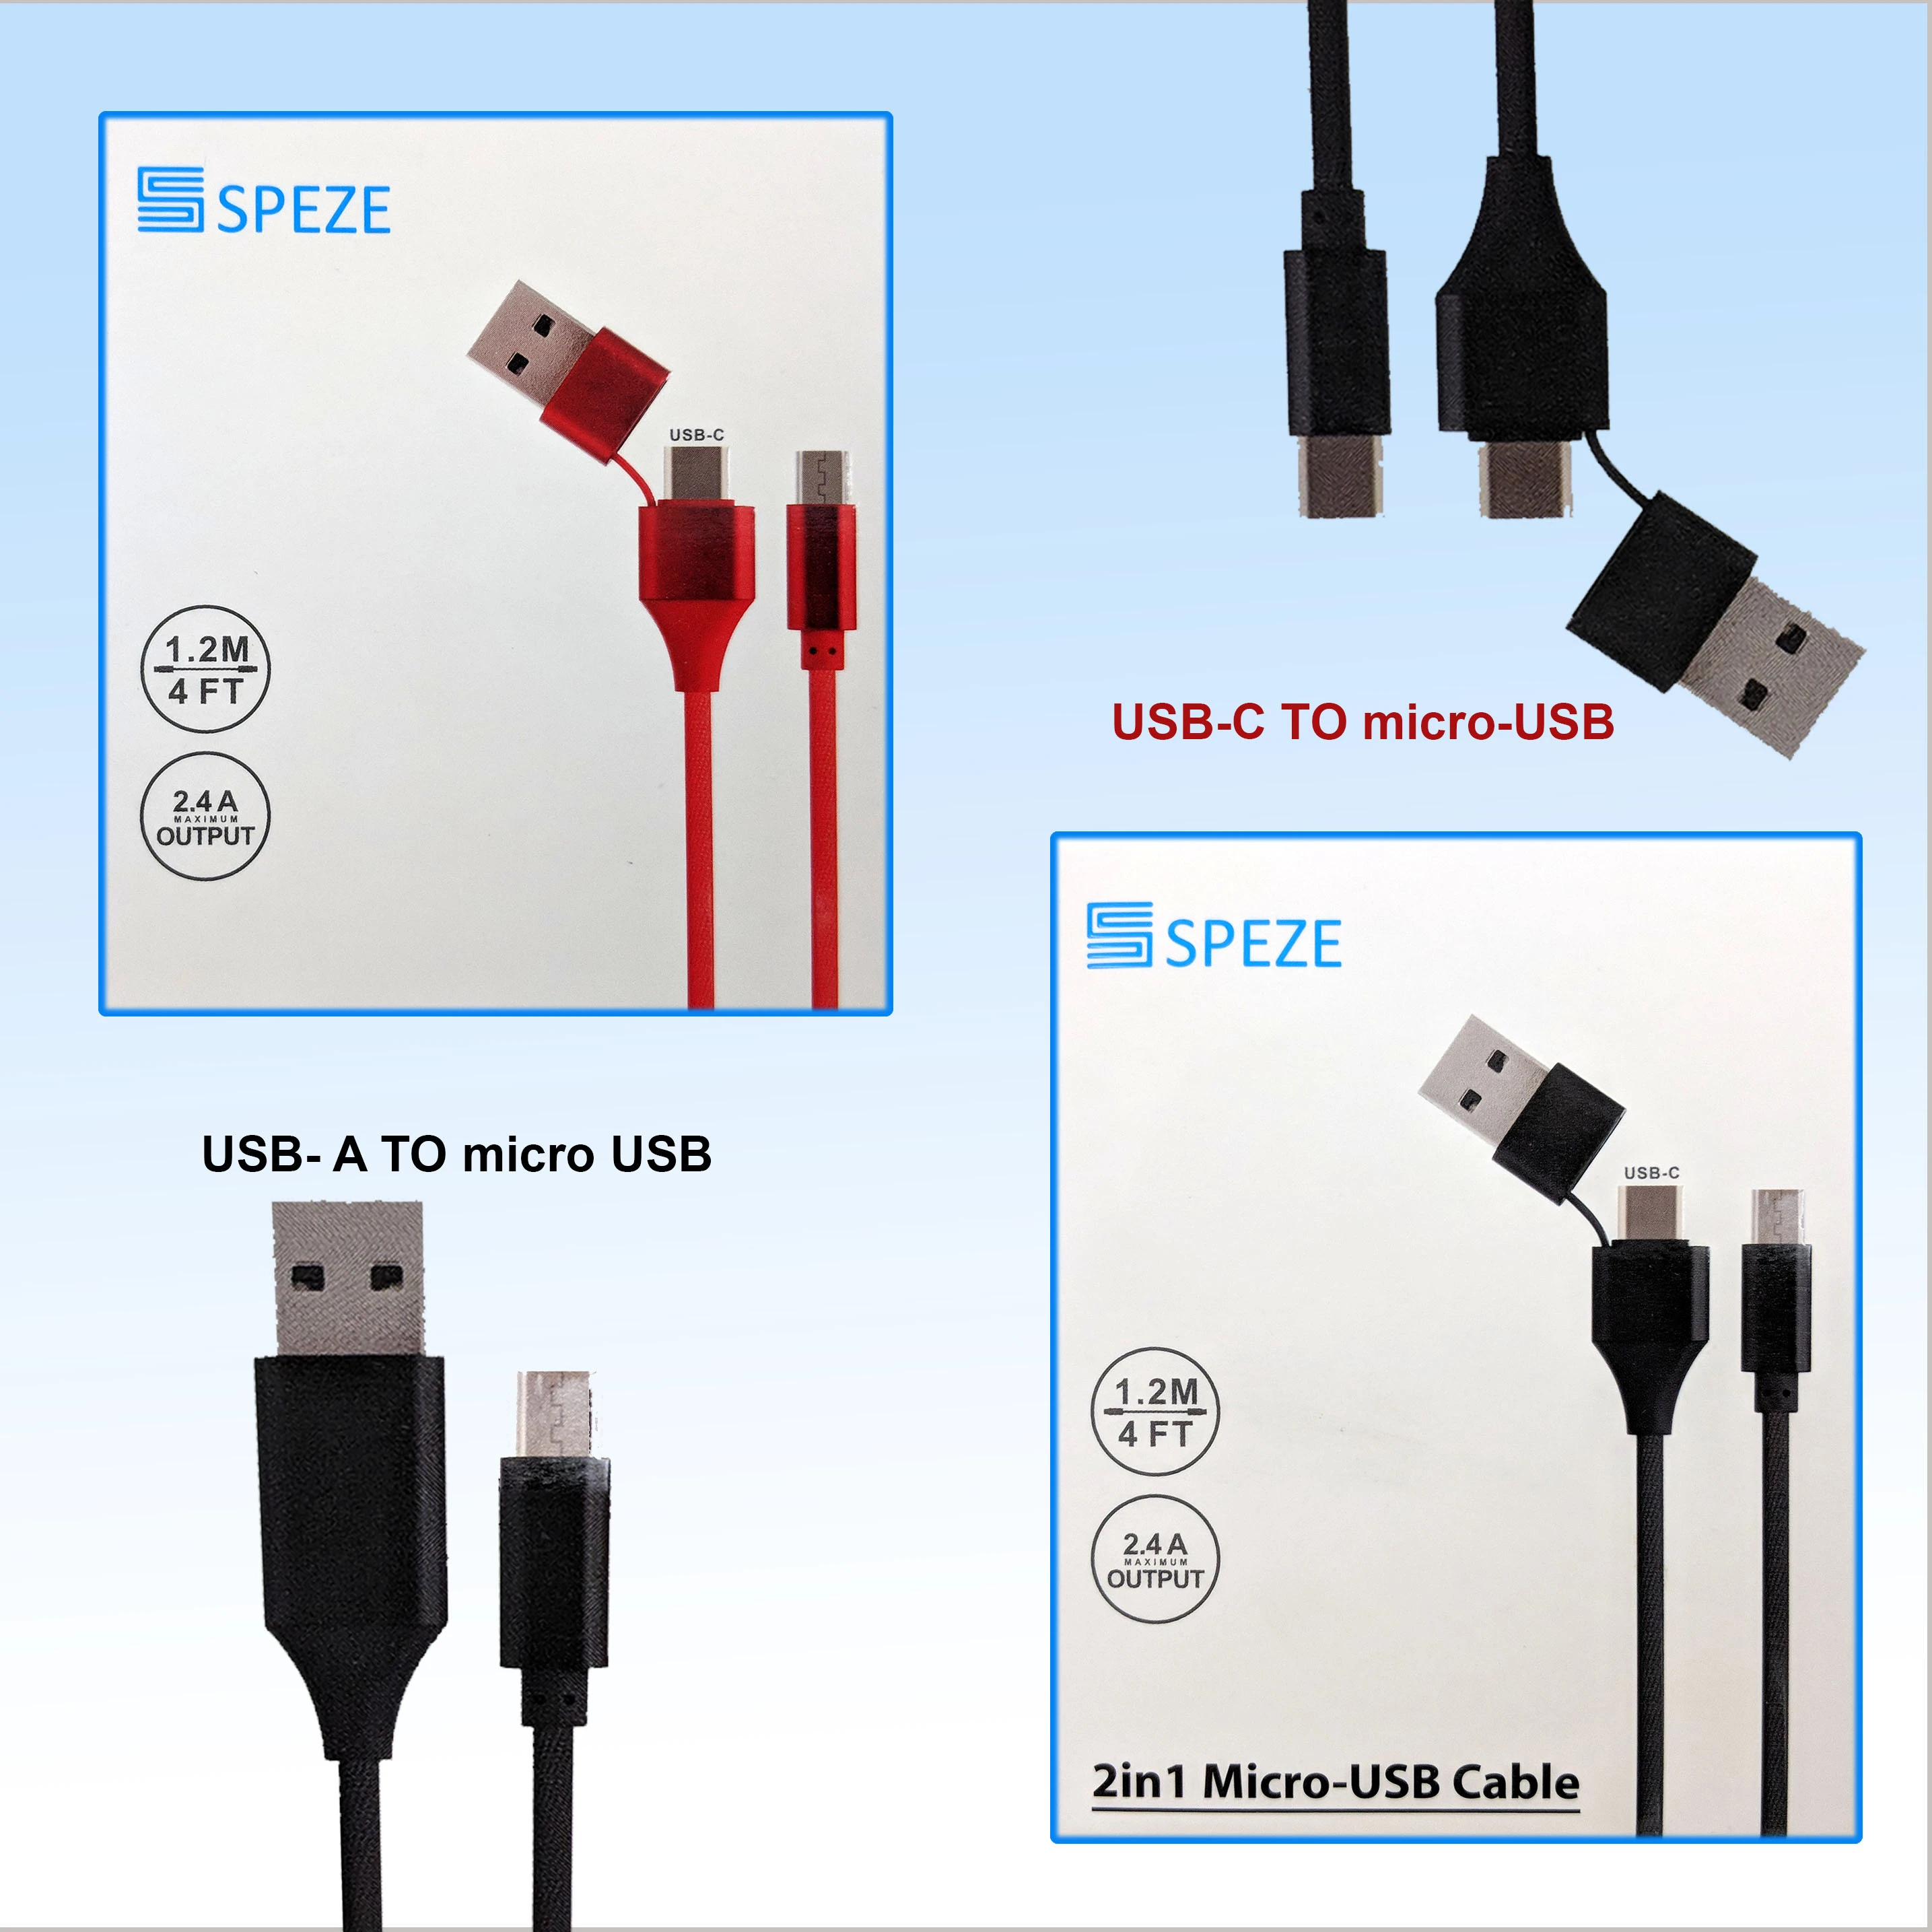 SPEZE 2IN1 MICRO PD23 CABLE BLACK